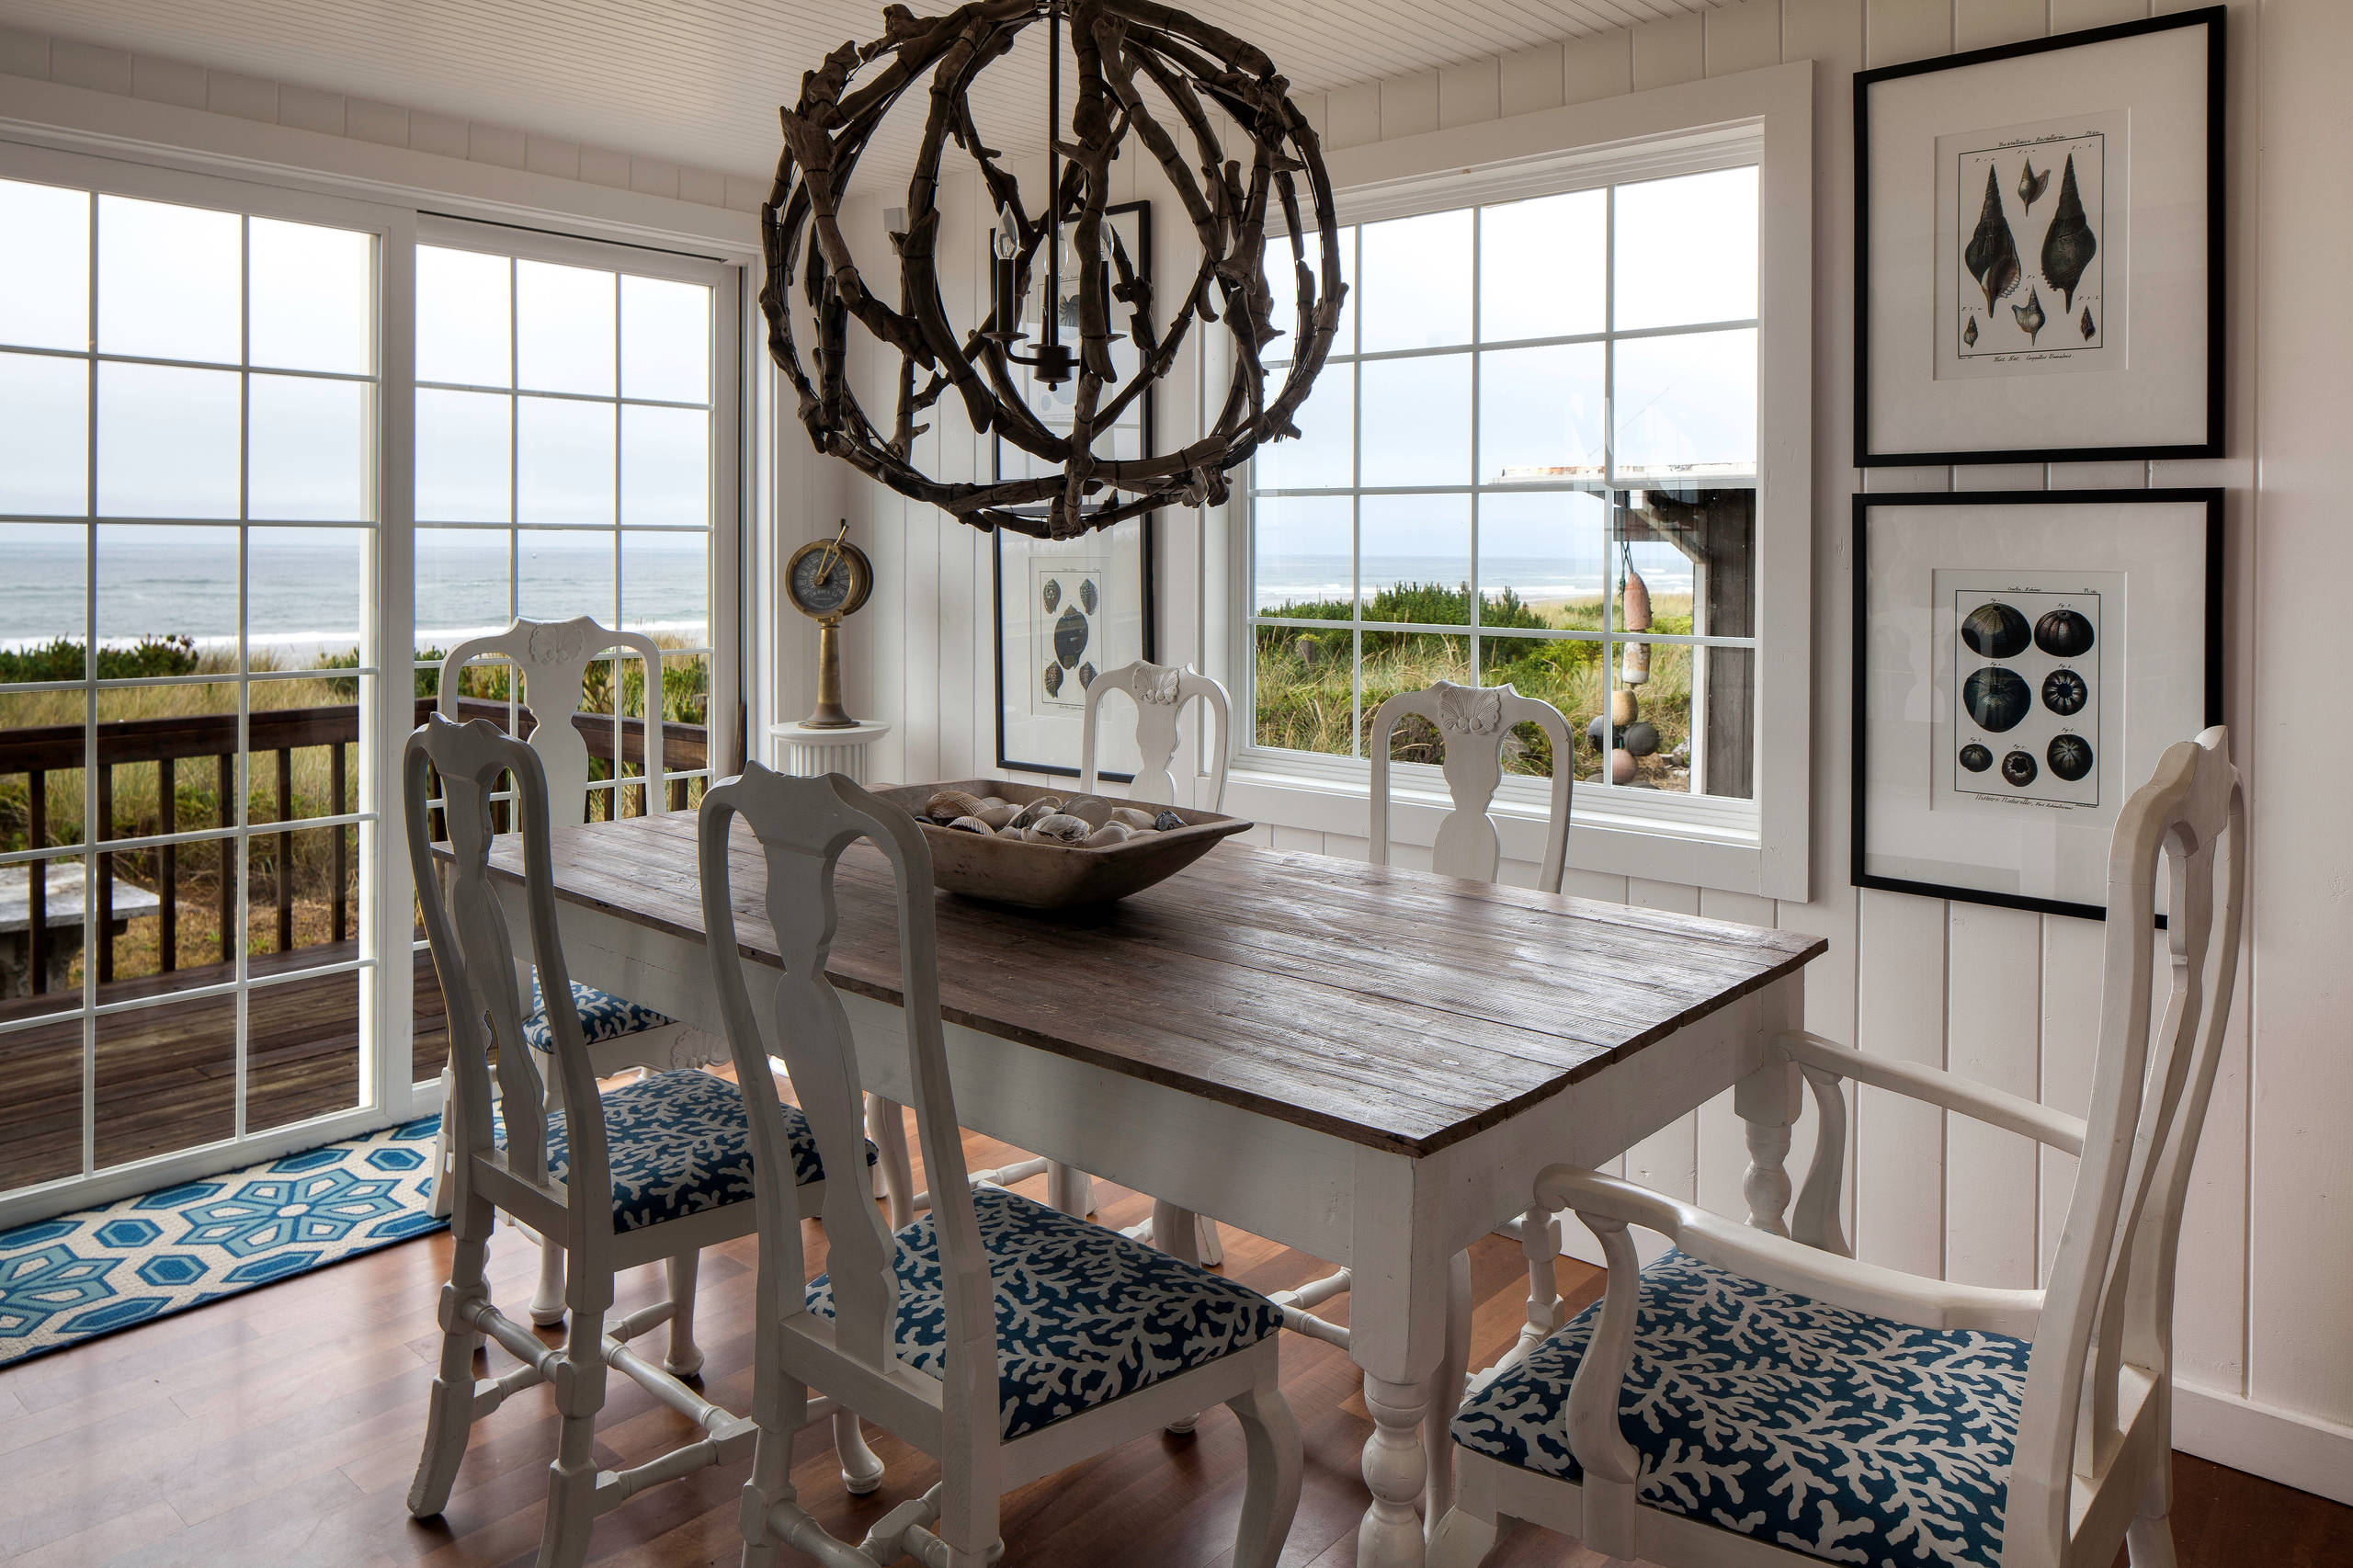 Nautical Fabric For Dining Room Chairs